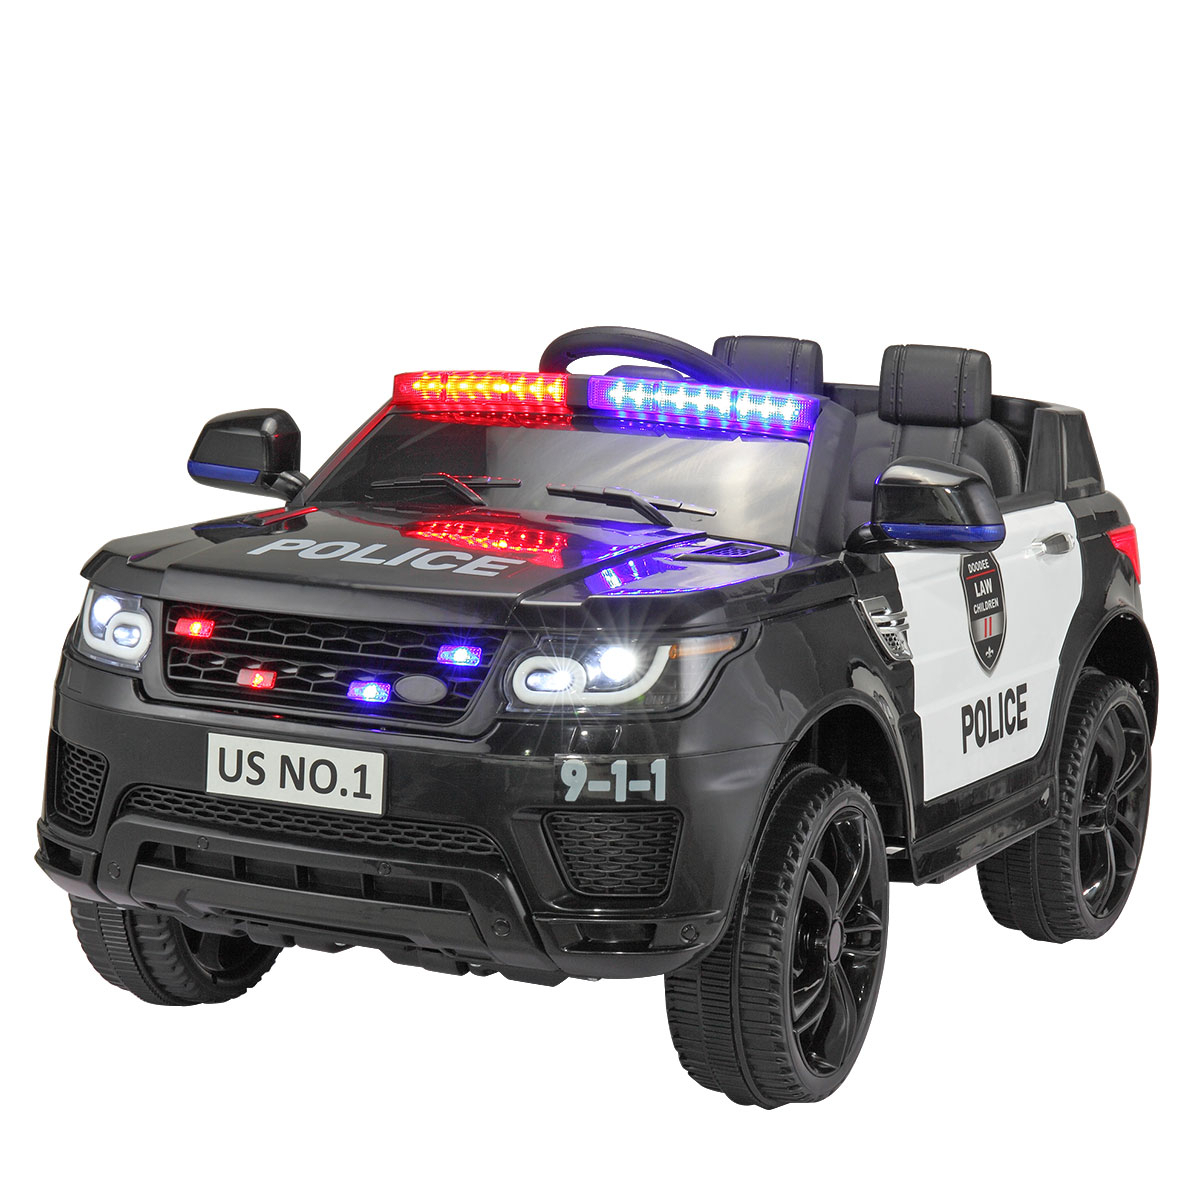 12V Kid Ride on Police Car with Parental Remote Control, Battery Powered Electric Truck with Siren, Flashing Lights,Music, Black